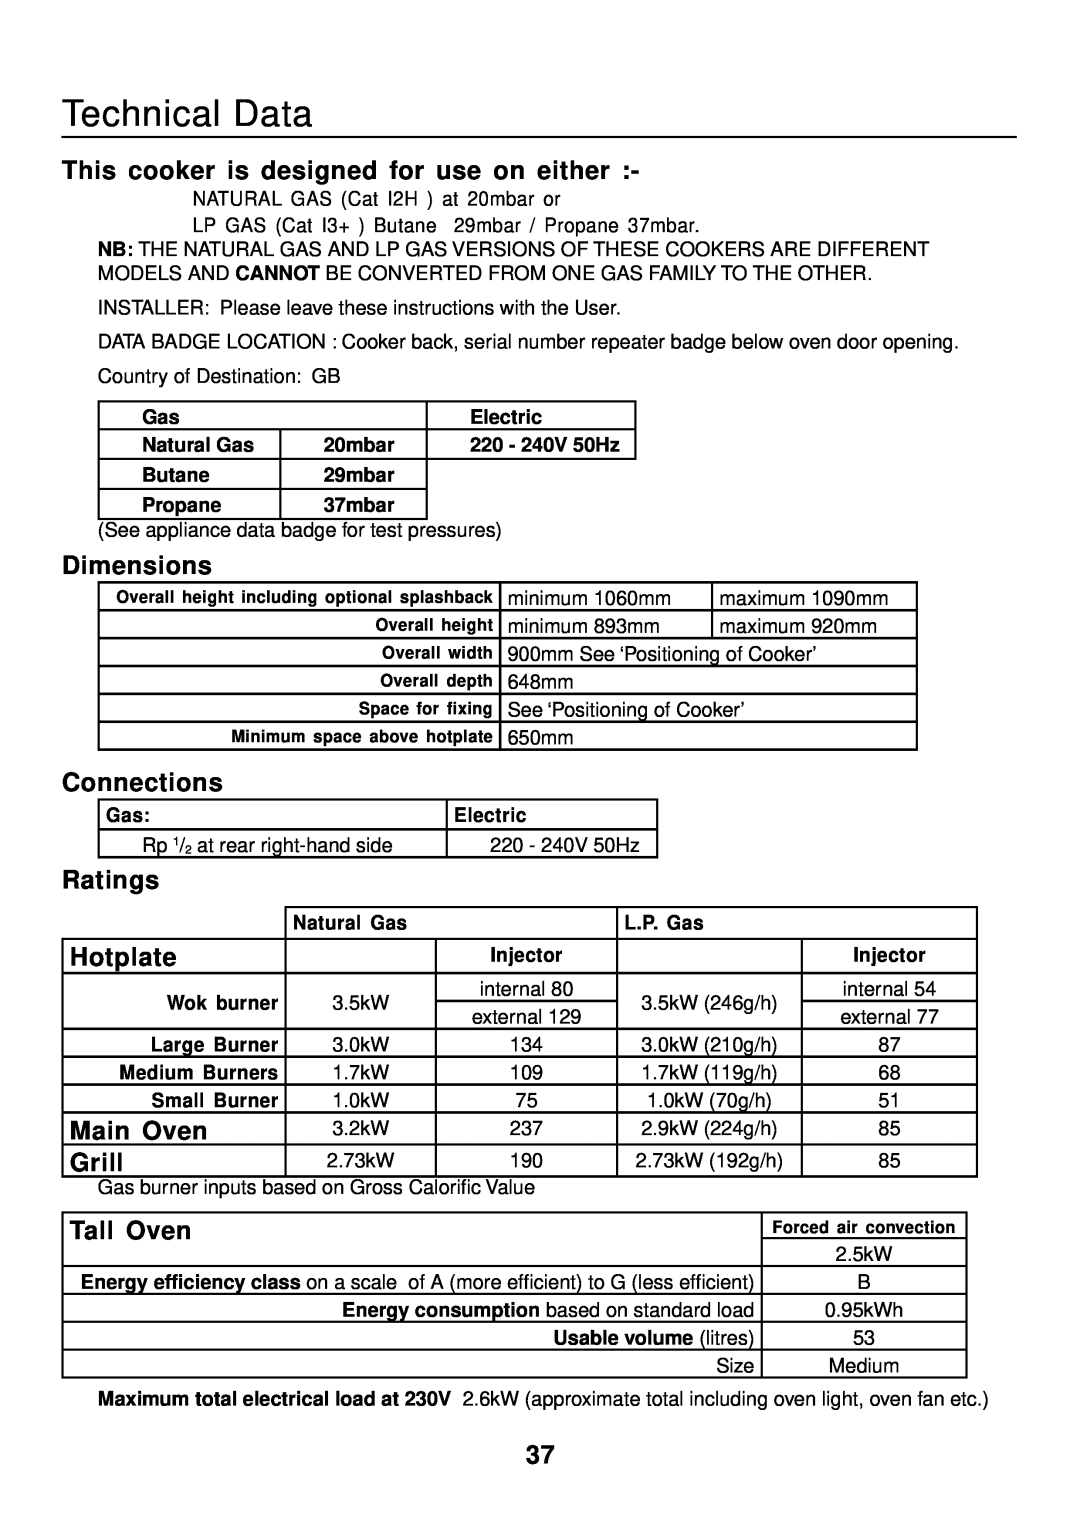 Rangemaster 90 Gas Technical Data, This cooker is designed for use on either, Dimensions, Connections, Ratings, Main Oven 